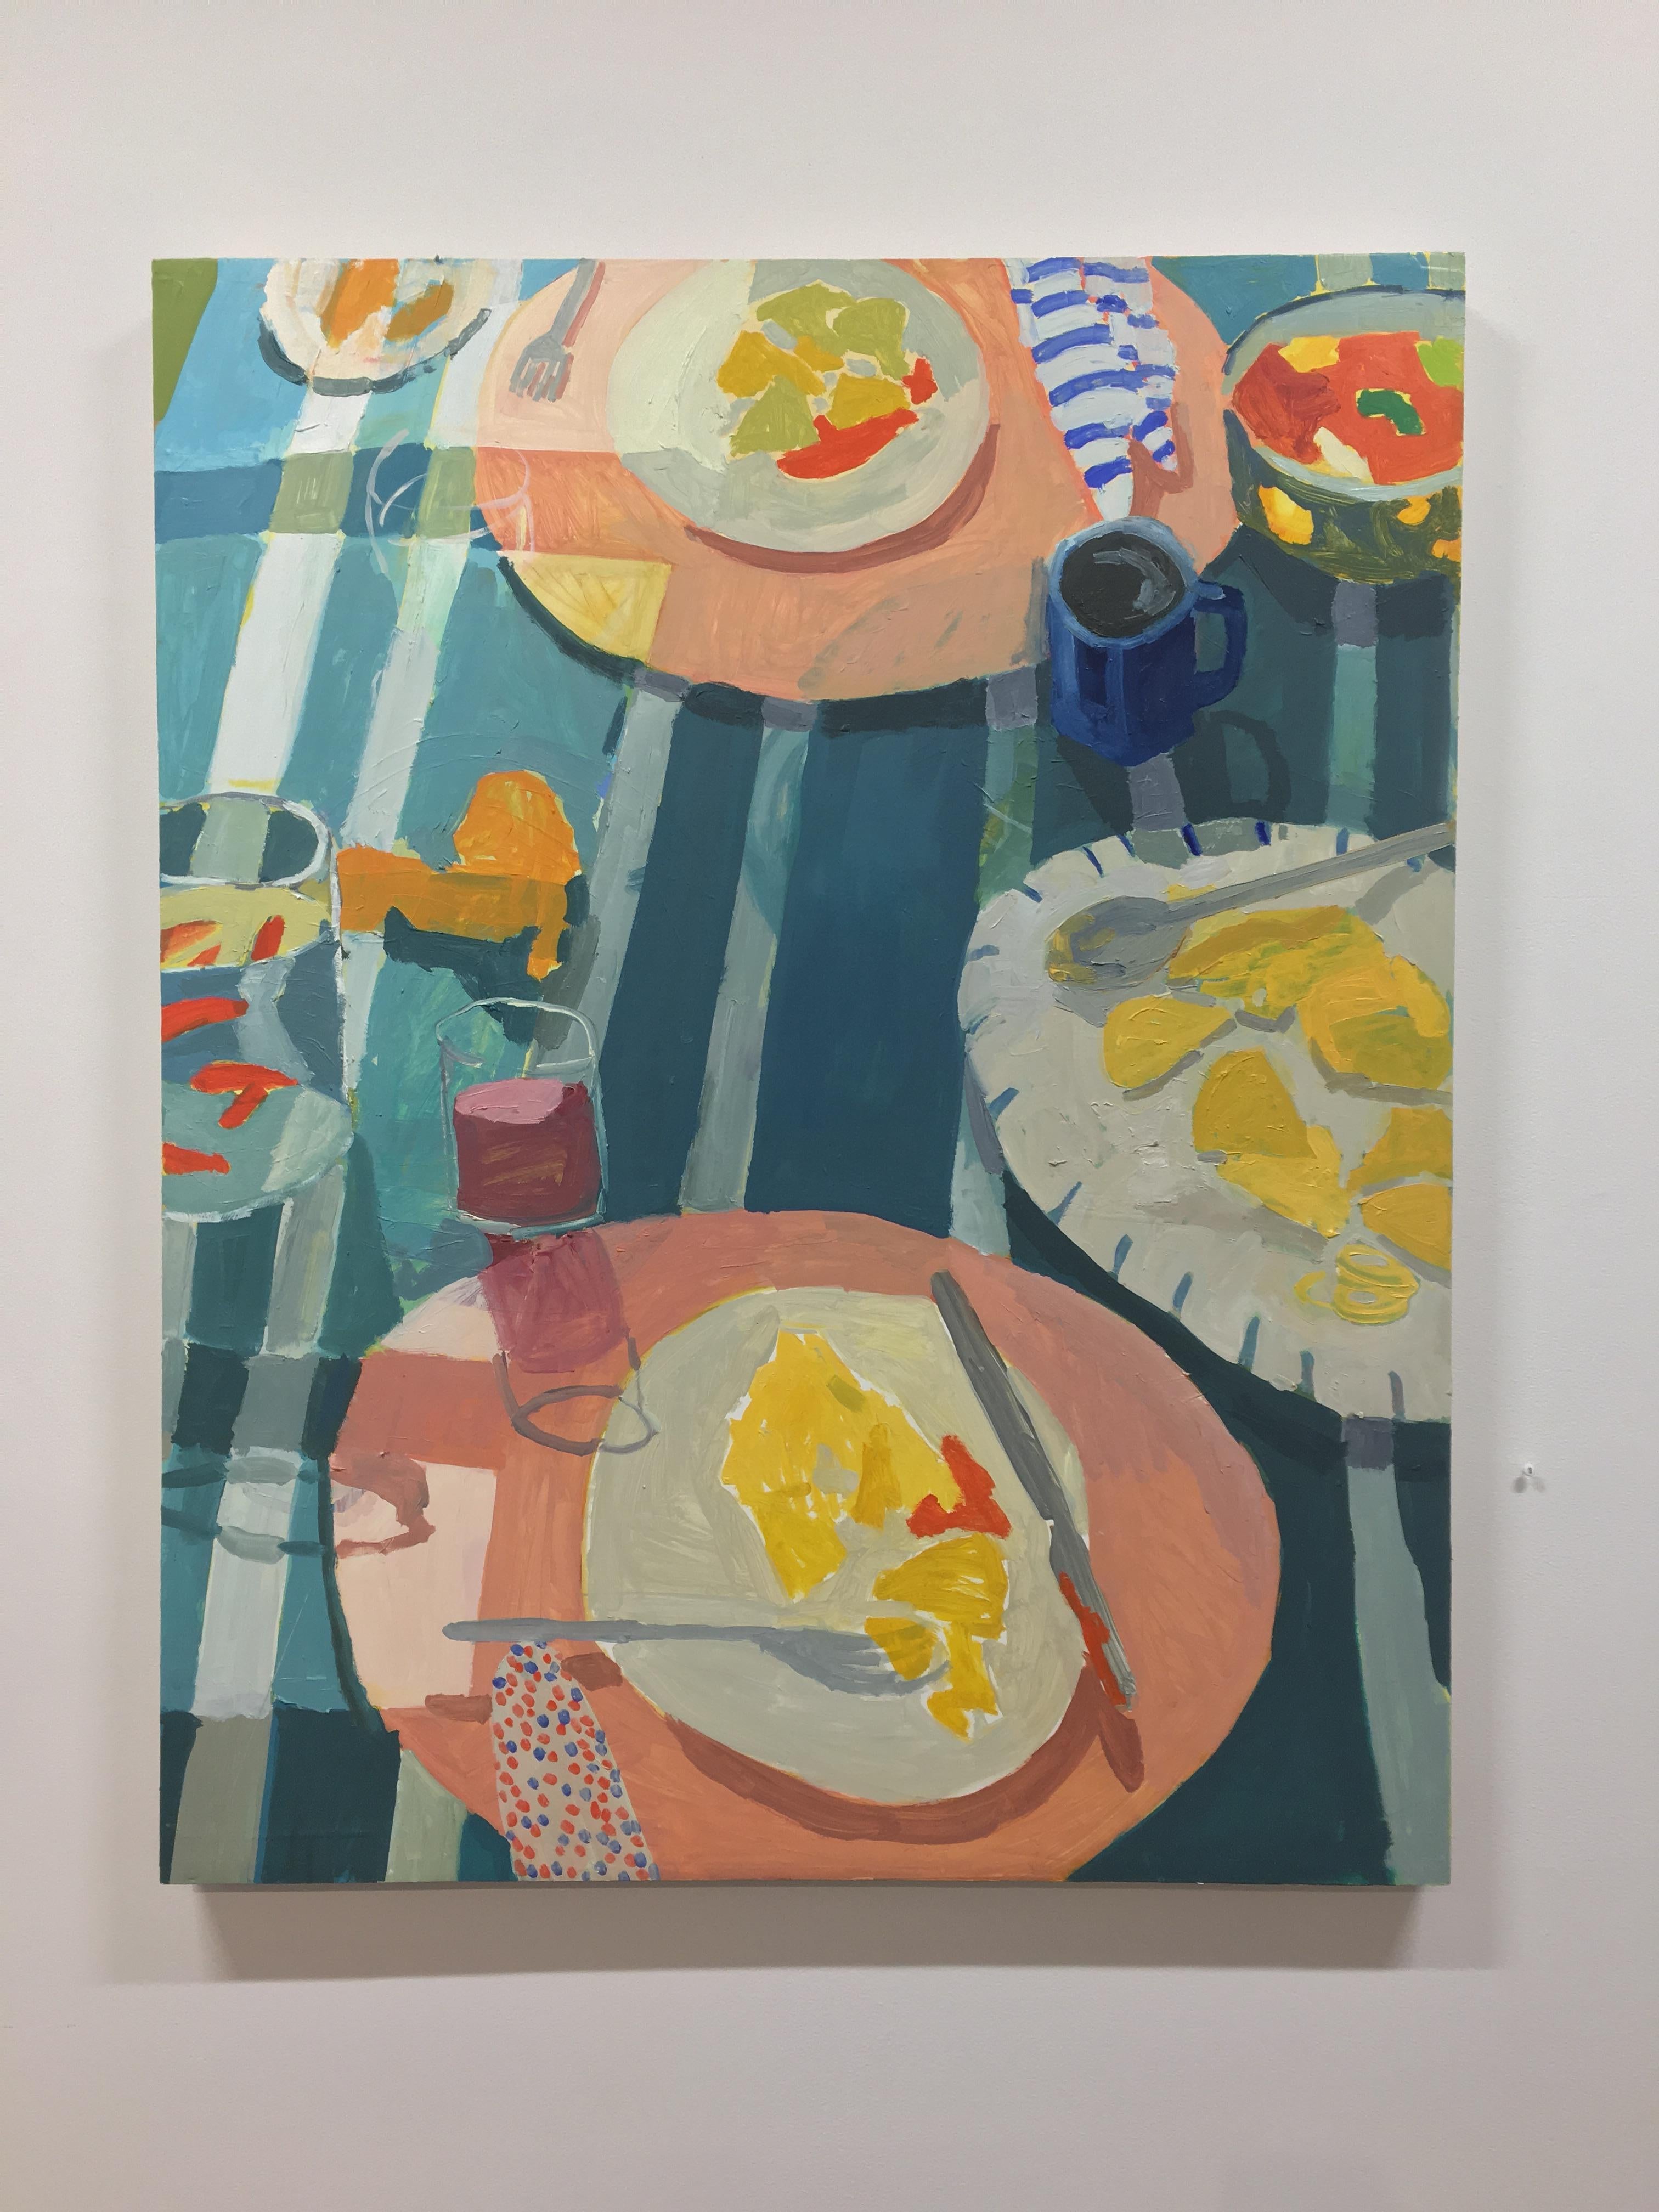 Seven Men in Oaxaca, Still Life with Fruit and Food on Blue Striped Tablecloth - Painting by Sophie Treppendahl